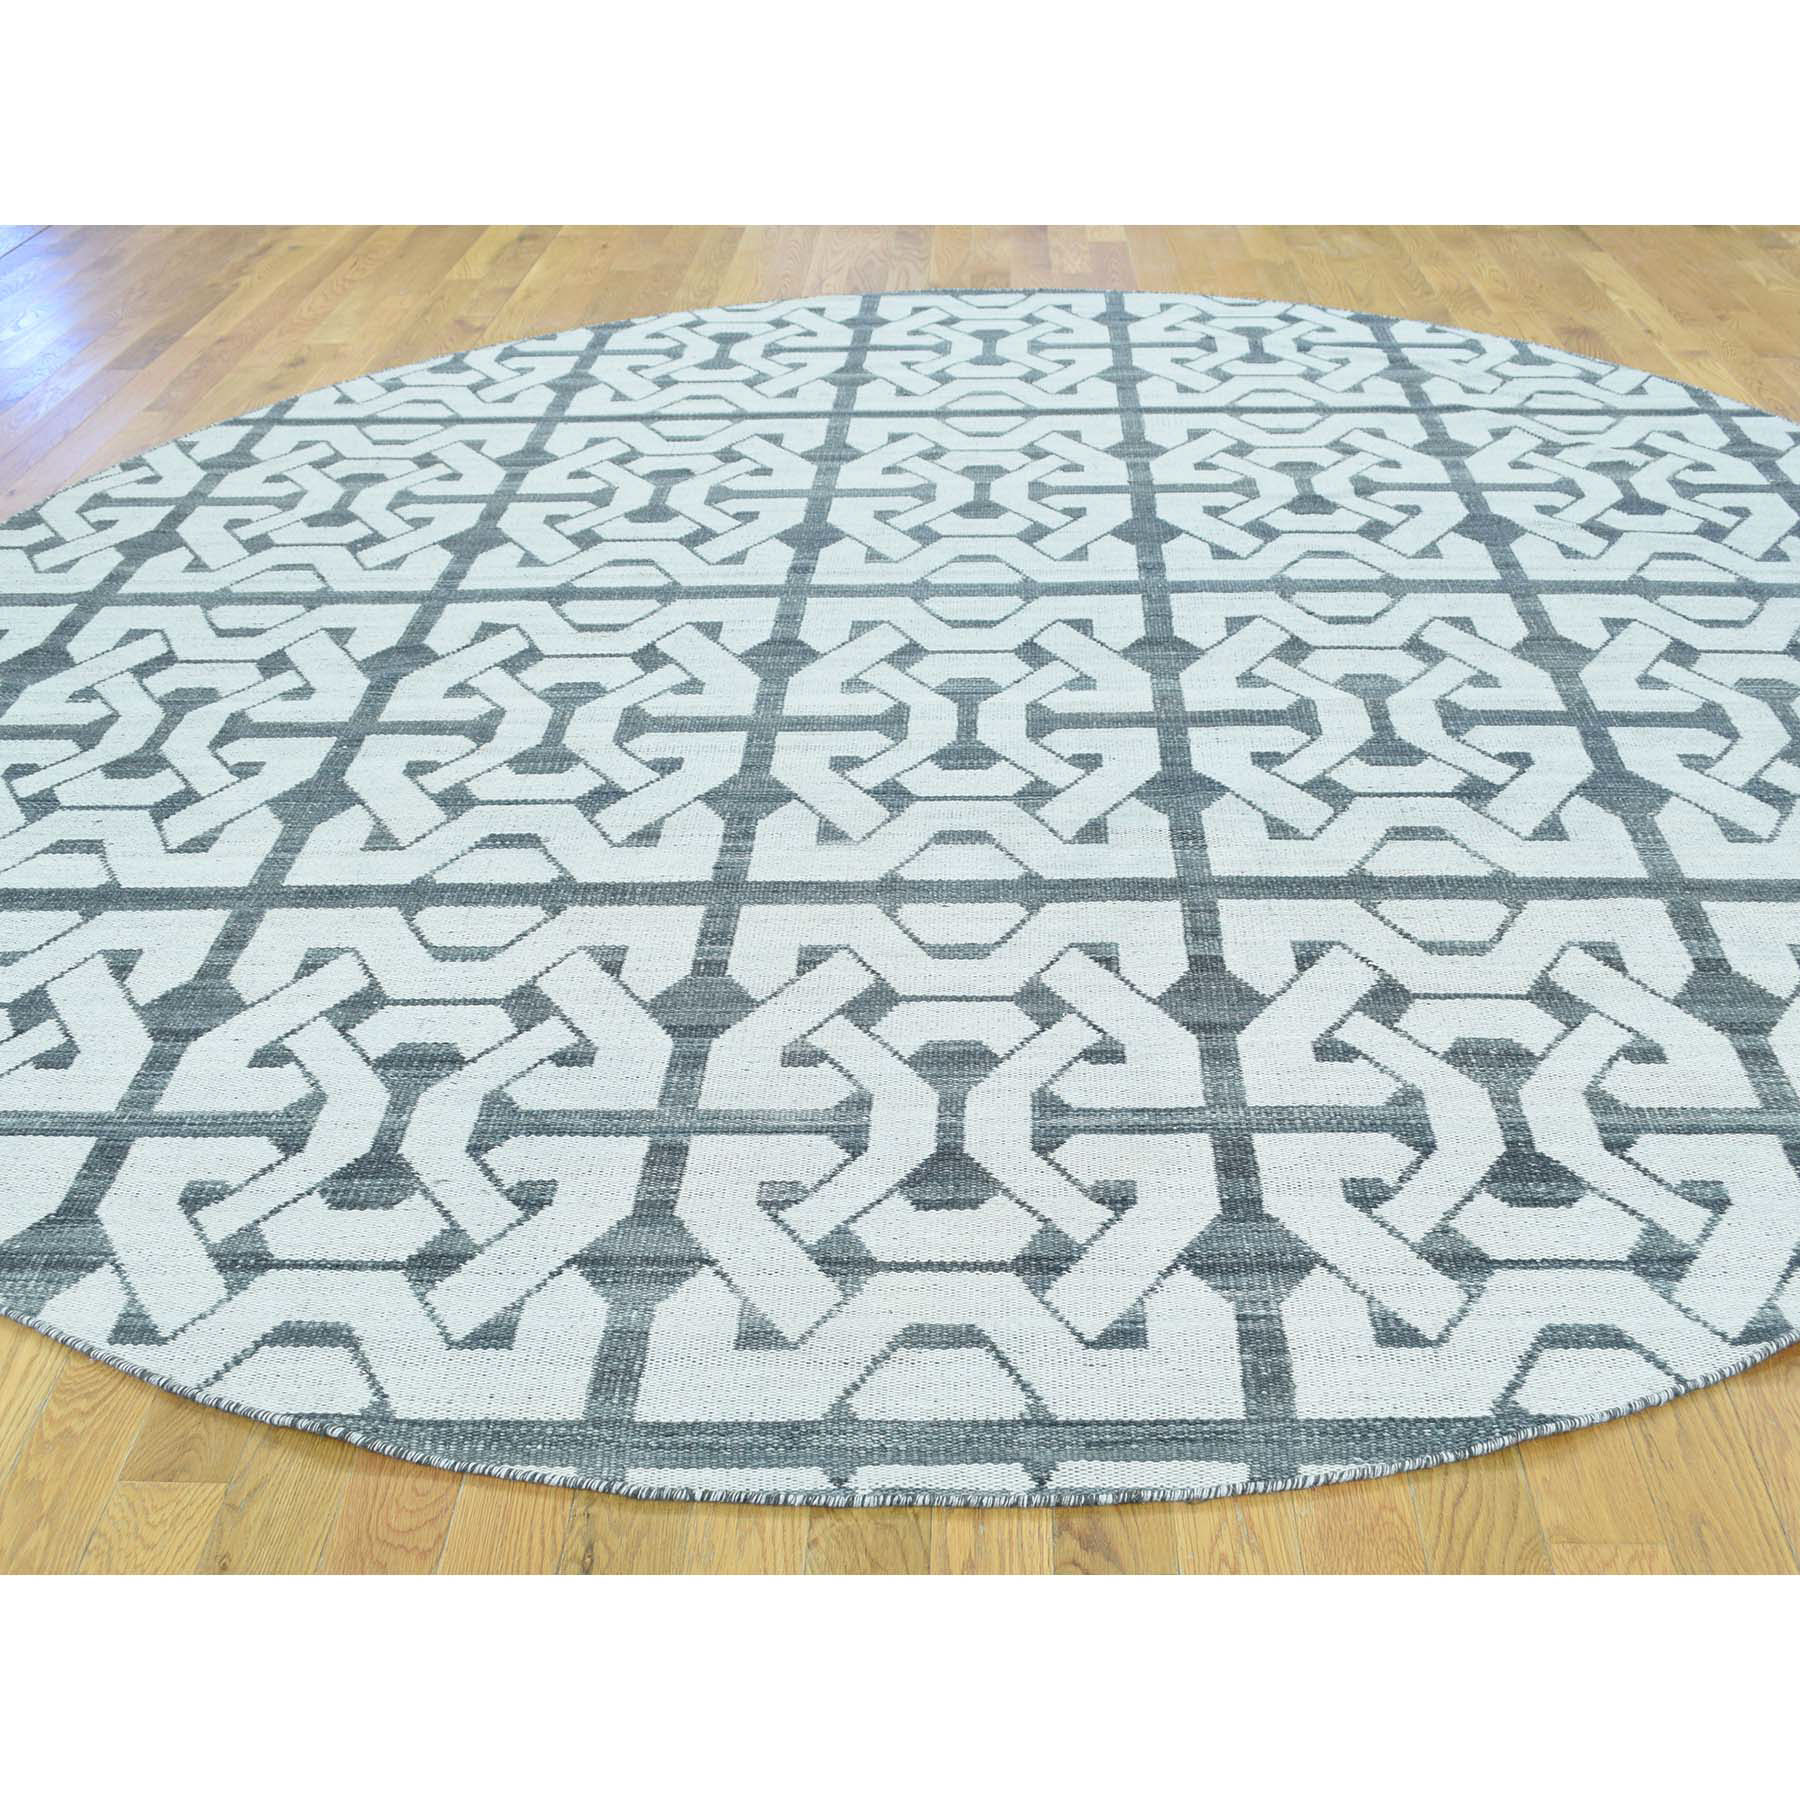 9-10 x9-10  Hand Woven Flat Weave Durie Kilim Reversible Round Rug 